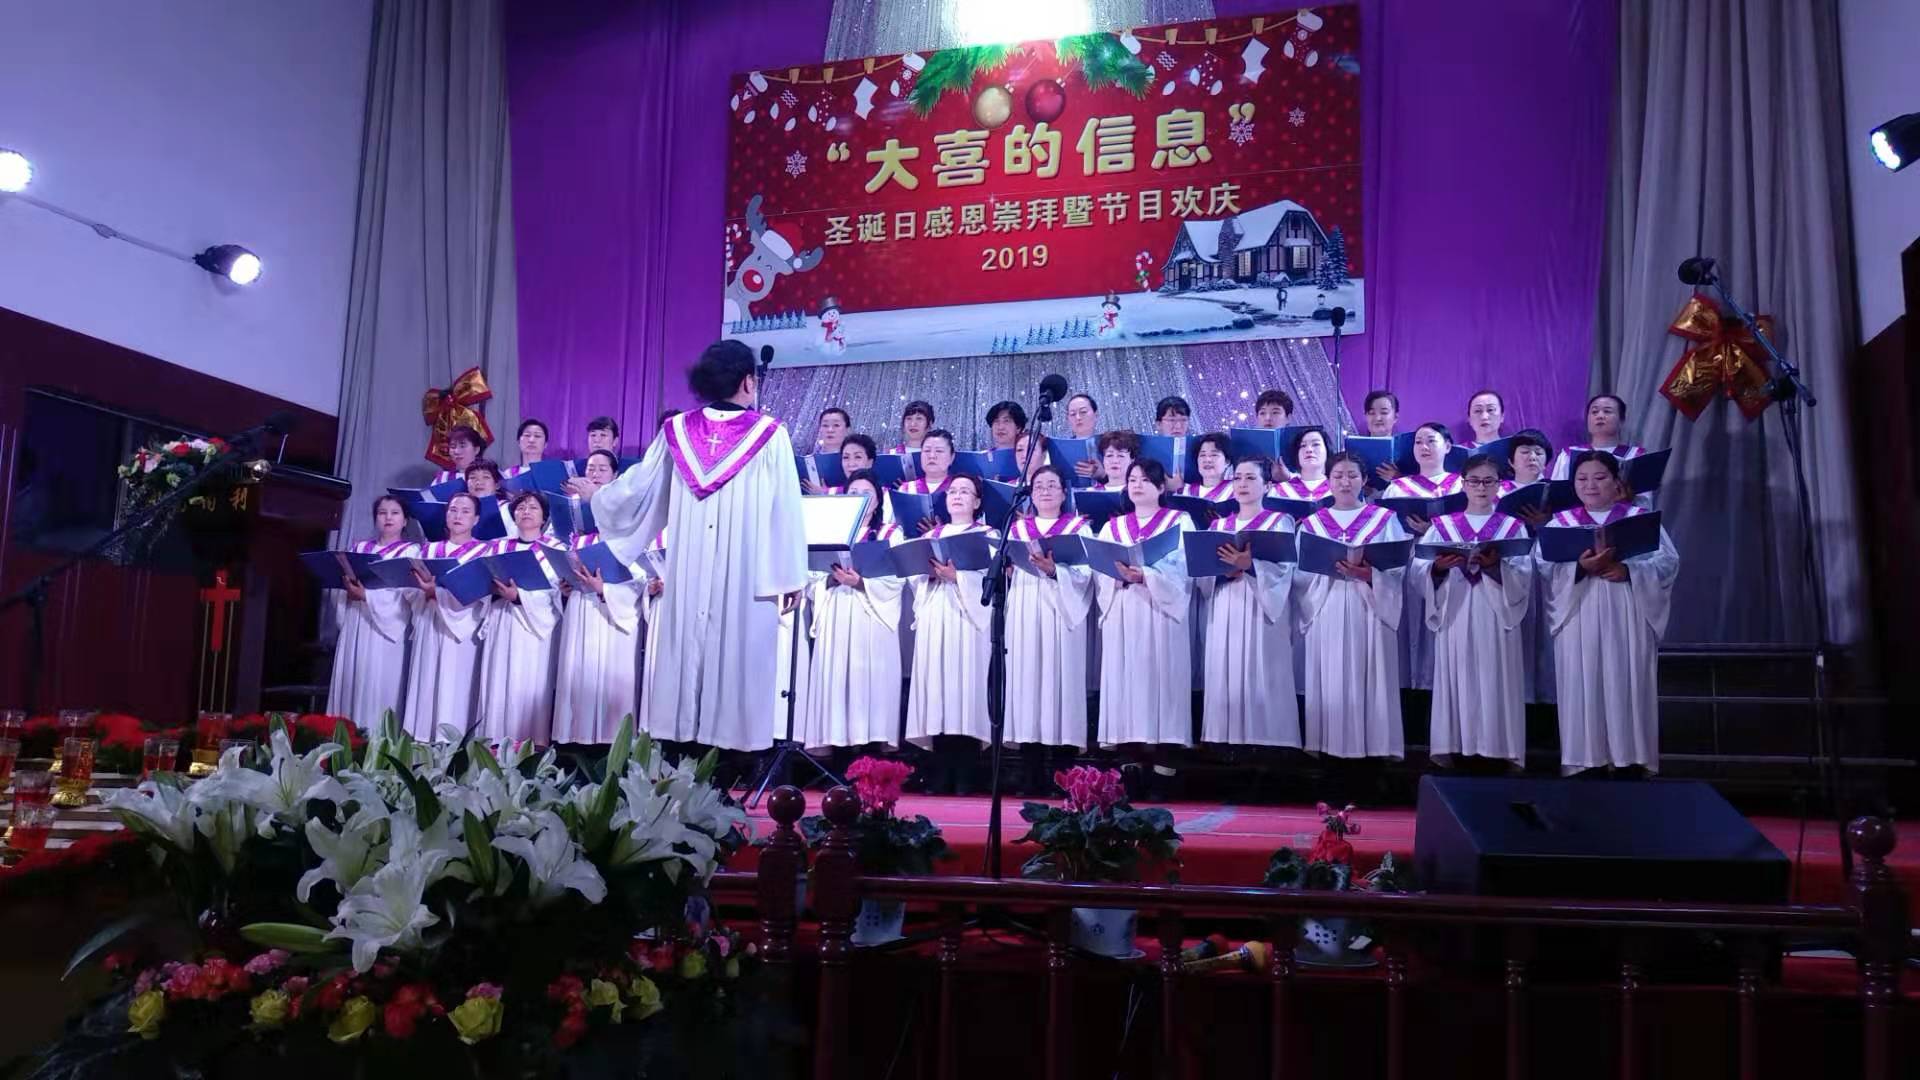 The choir of Yandu District Church of Linfen, Shanxi offered hymns to celebrate the birth of Jesus on Dec. 25, 2019.